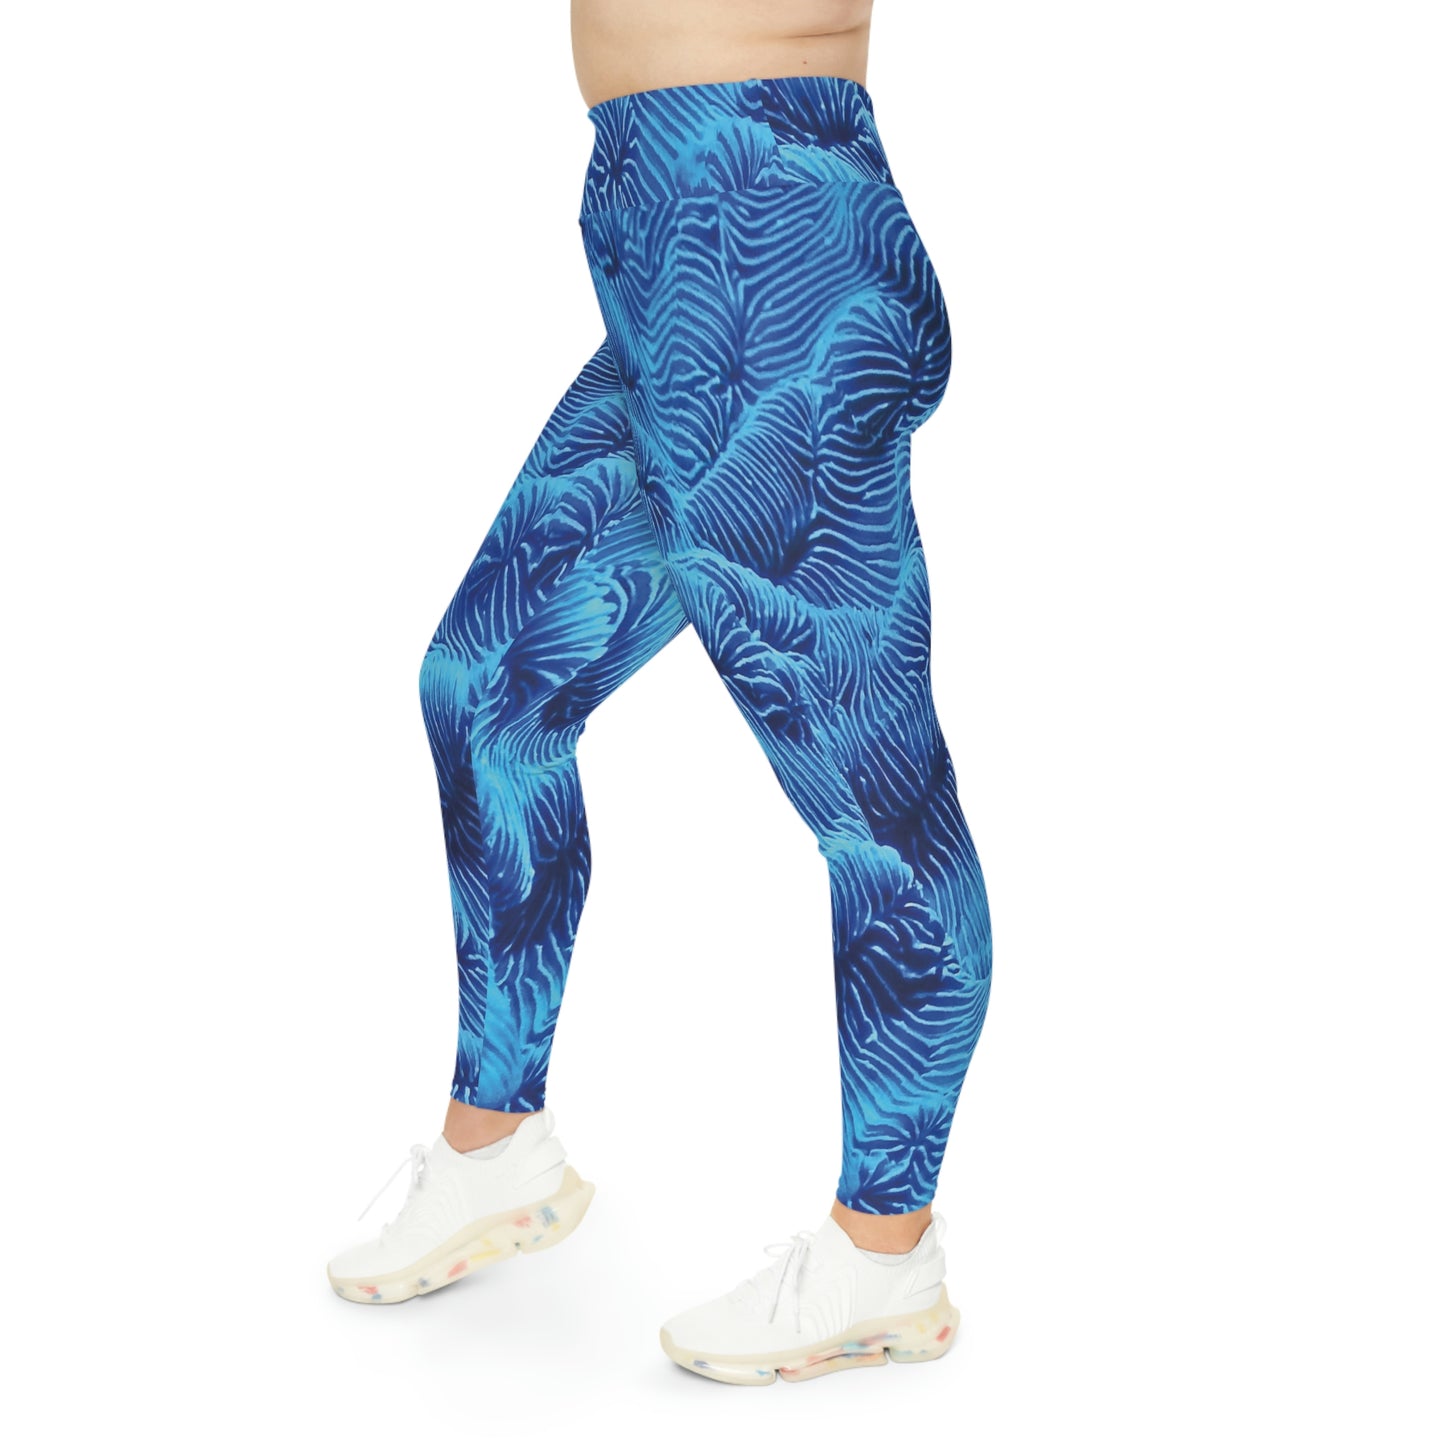 Beach Ocean Plus Size Leggings One of a Kind Gift - Unique Workout Activewear tights for Wife fitness, Mother, Girlfriend Christmas Gift